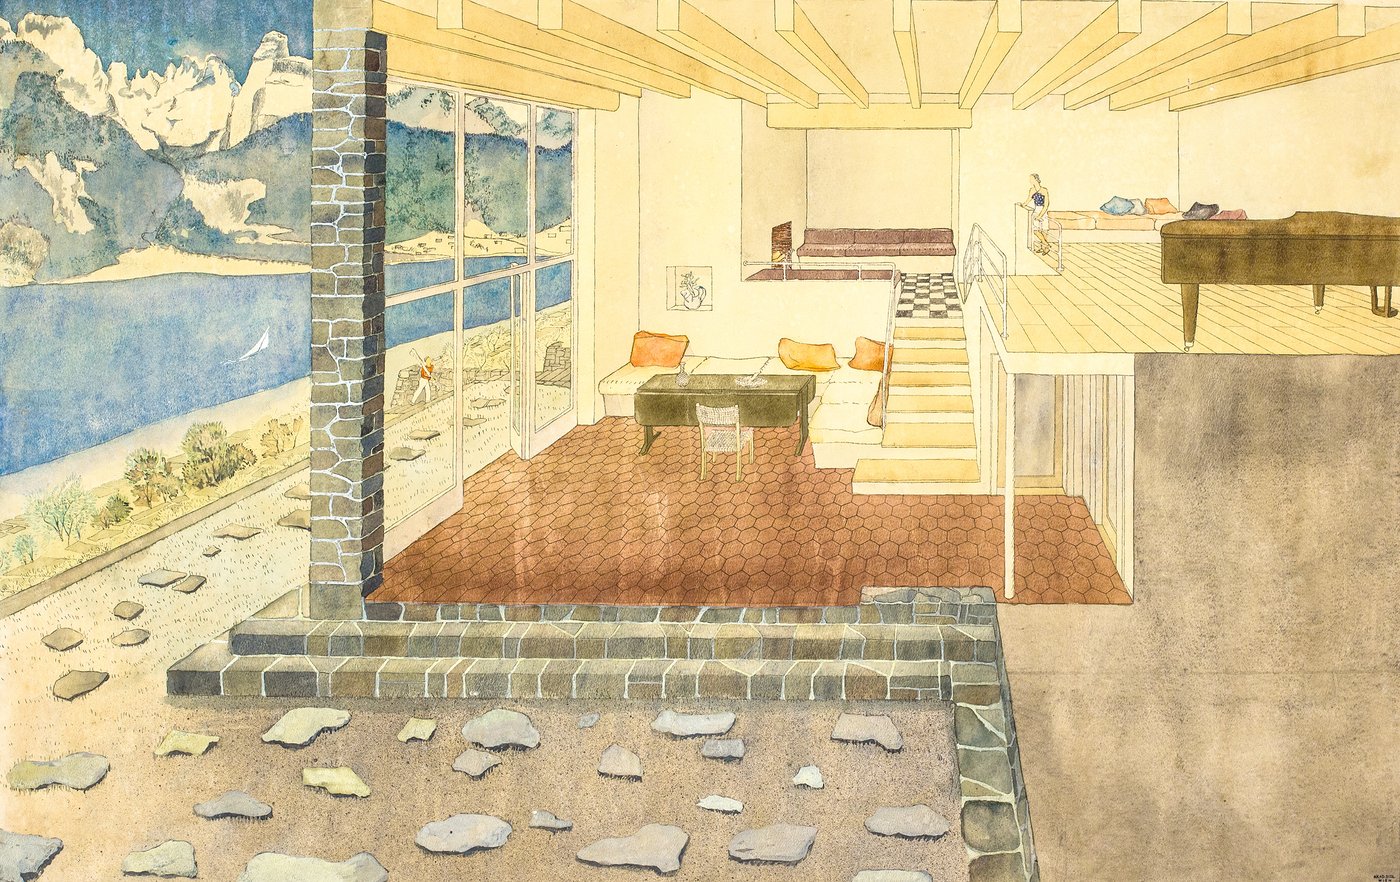 A coloured watercolour drawing giving a cross-sectional view of a residential house. On the ground floor, a brown fold-out table with a white chair and a beige corner bench with orange cushions can be seen. To the right, a staircase leads to the next floor with reddish seating. Further to the right, another plateau leads to another seating area with coloured cushions, and in the foreground is a brown piano. To the left of the house there is a view of a lake with mountains in the background.